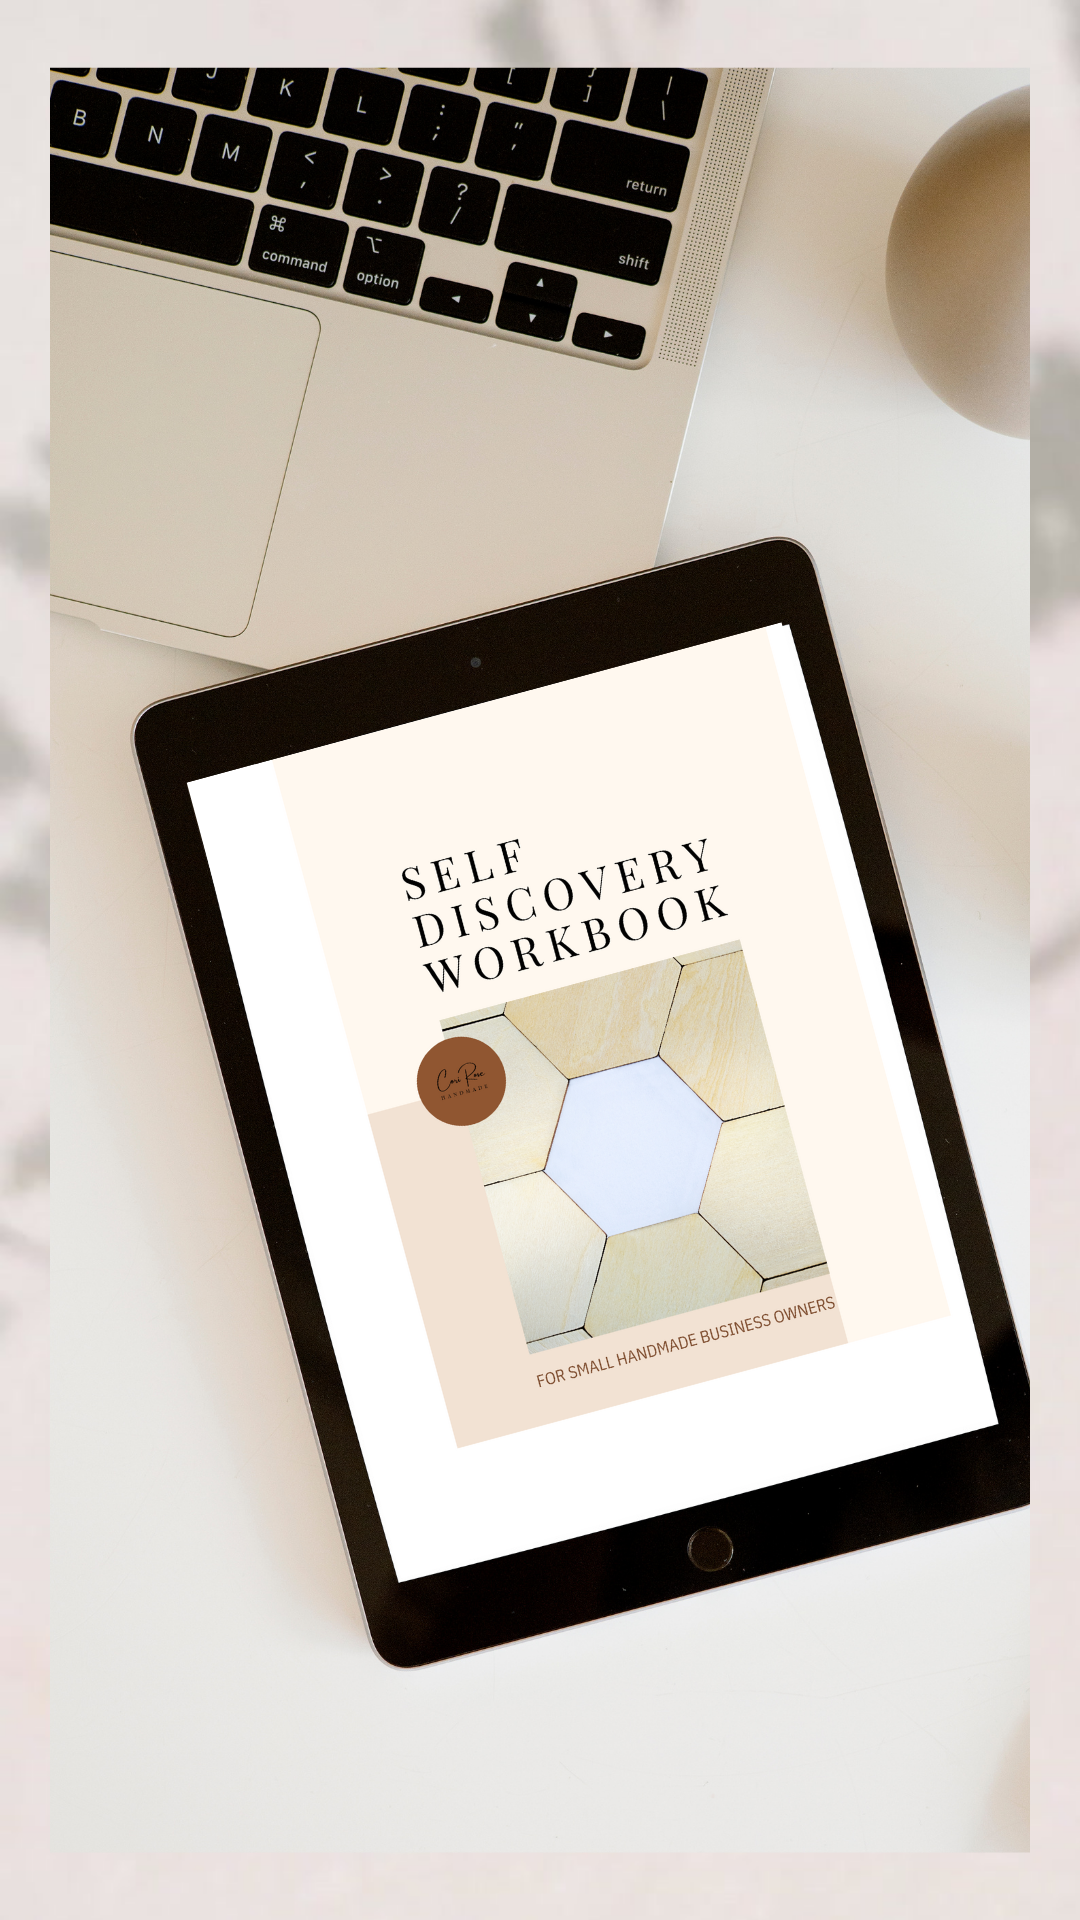 Self Discovery Workbook for Creative Business Owners